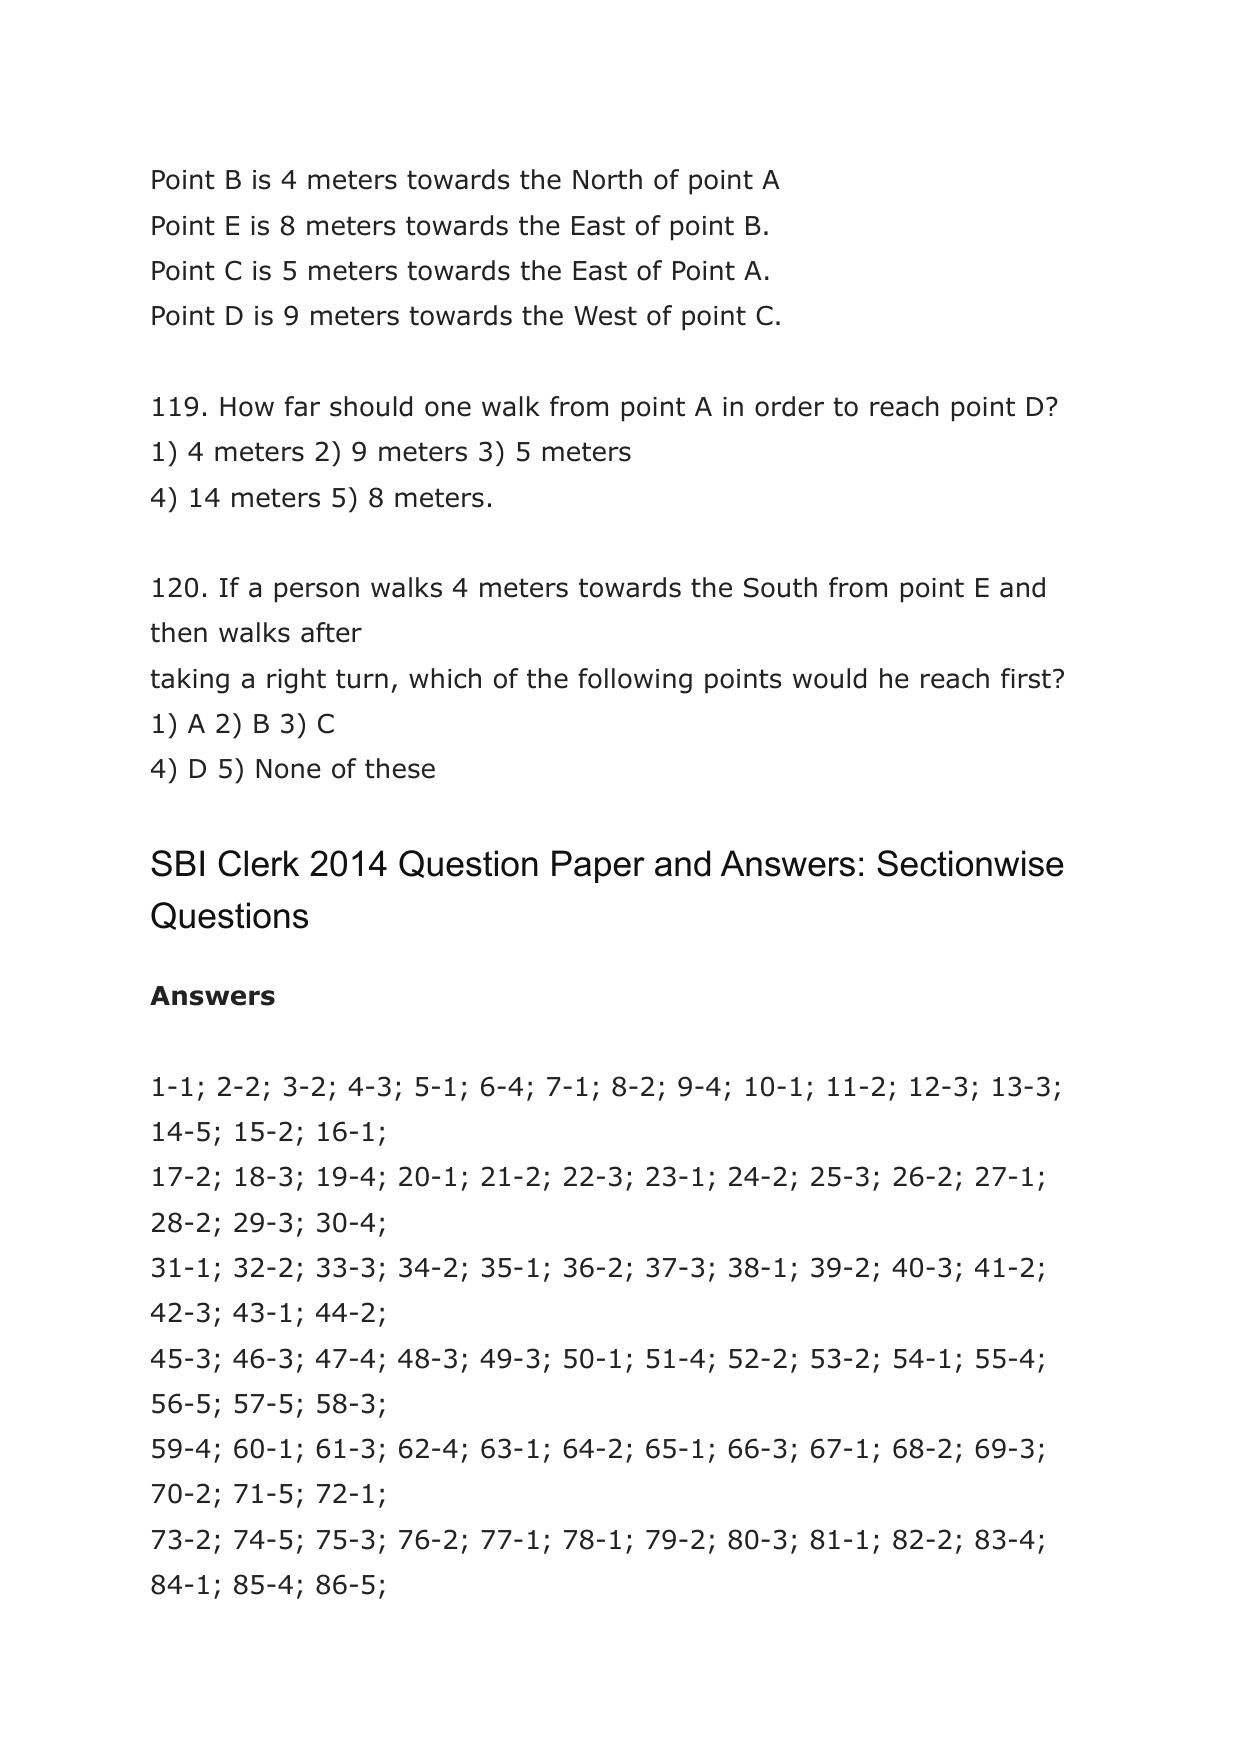 bsmfc.org Recovery Agent Model Papers PDF for Quantitative Aptitude - Page 36